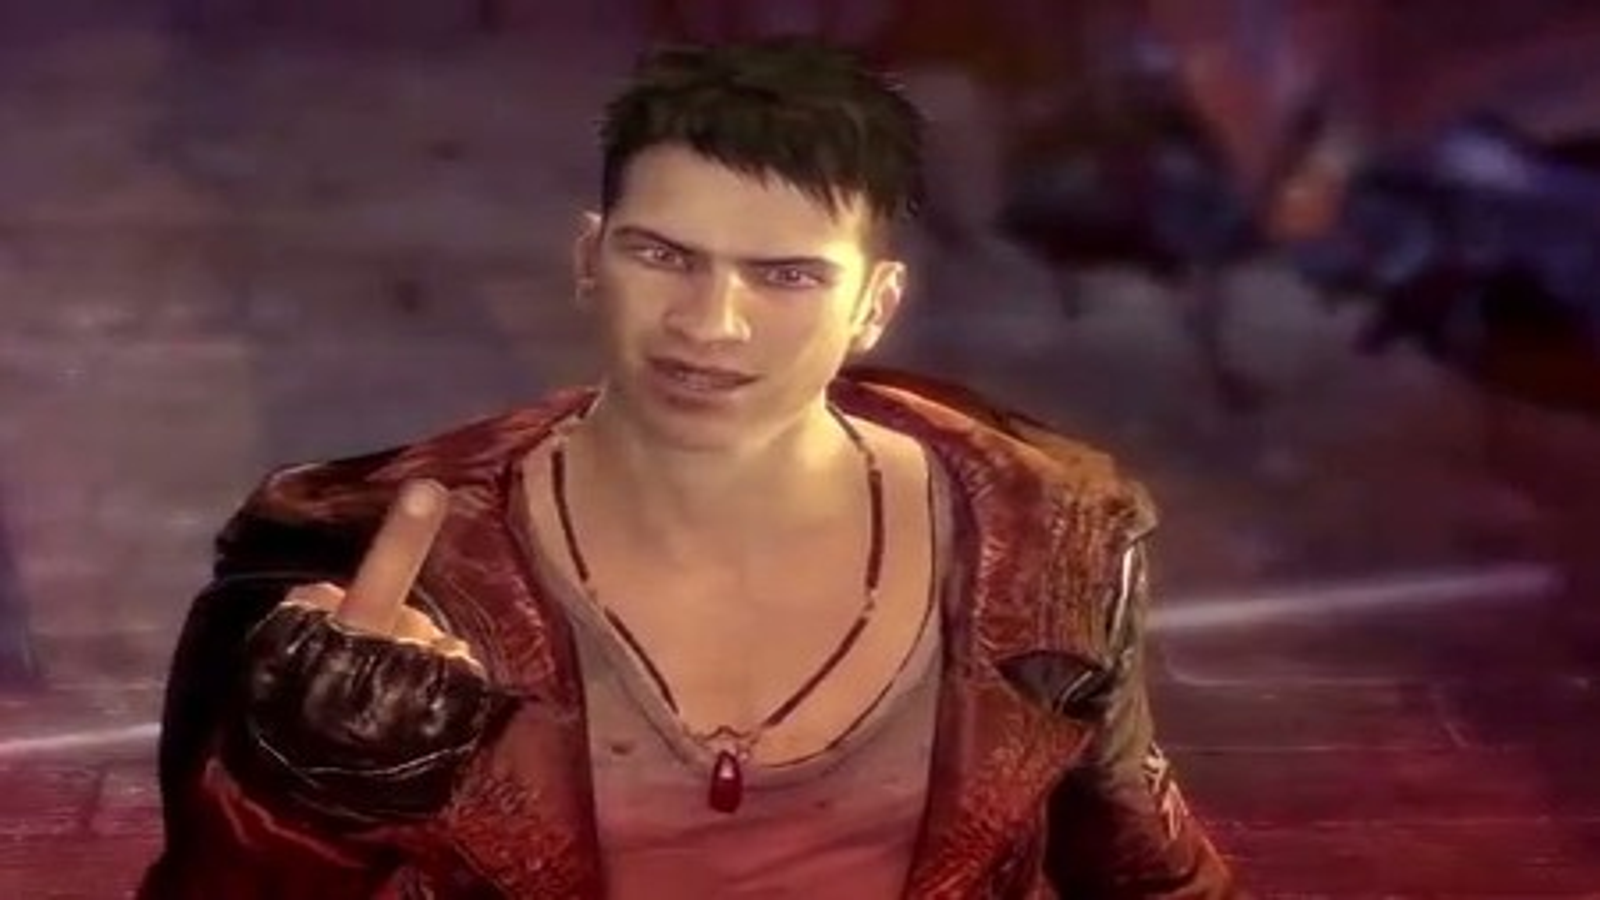 The role of the grotesque and Dante's limbo (DmC: Devil May Cry